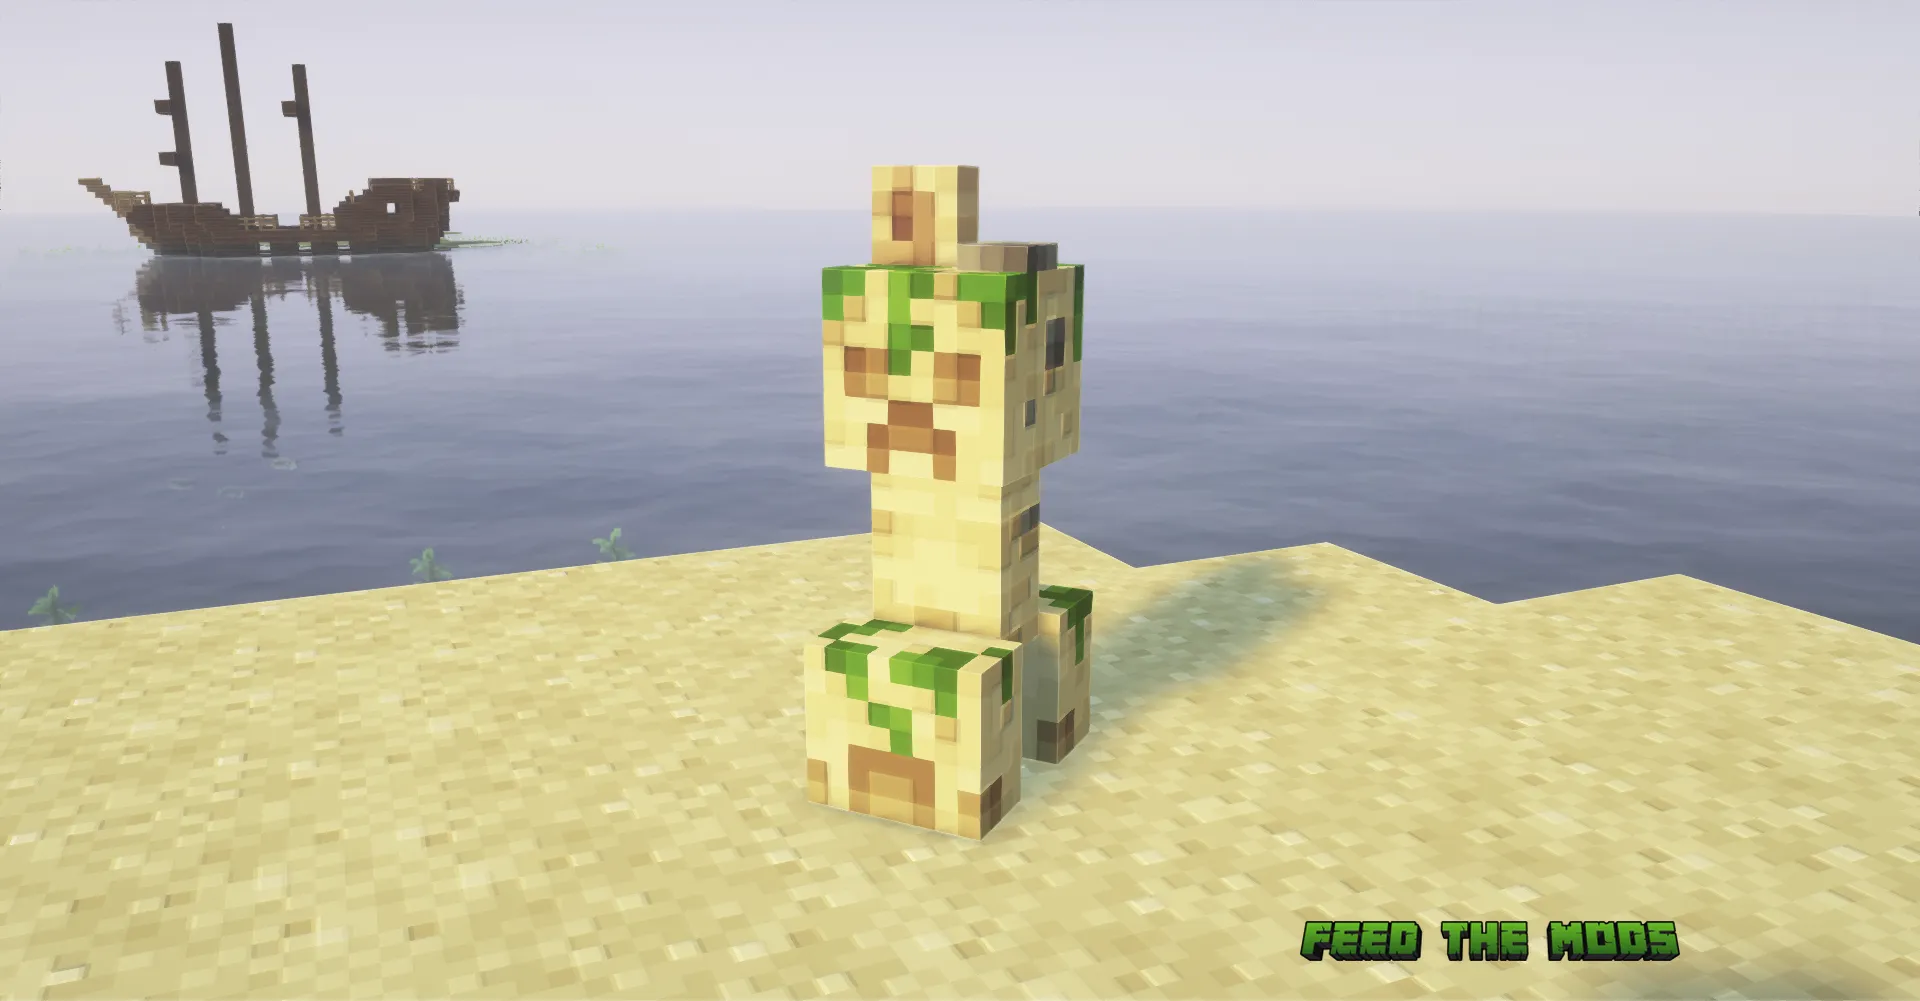 Kitty Slippers from Artifacts mod doesn't work vs Creeper Overhaul